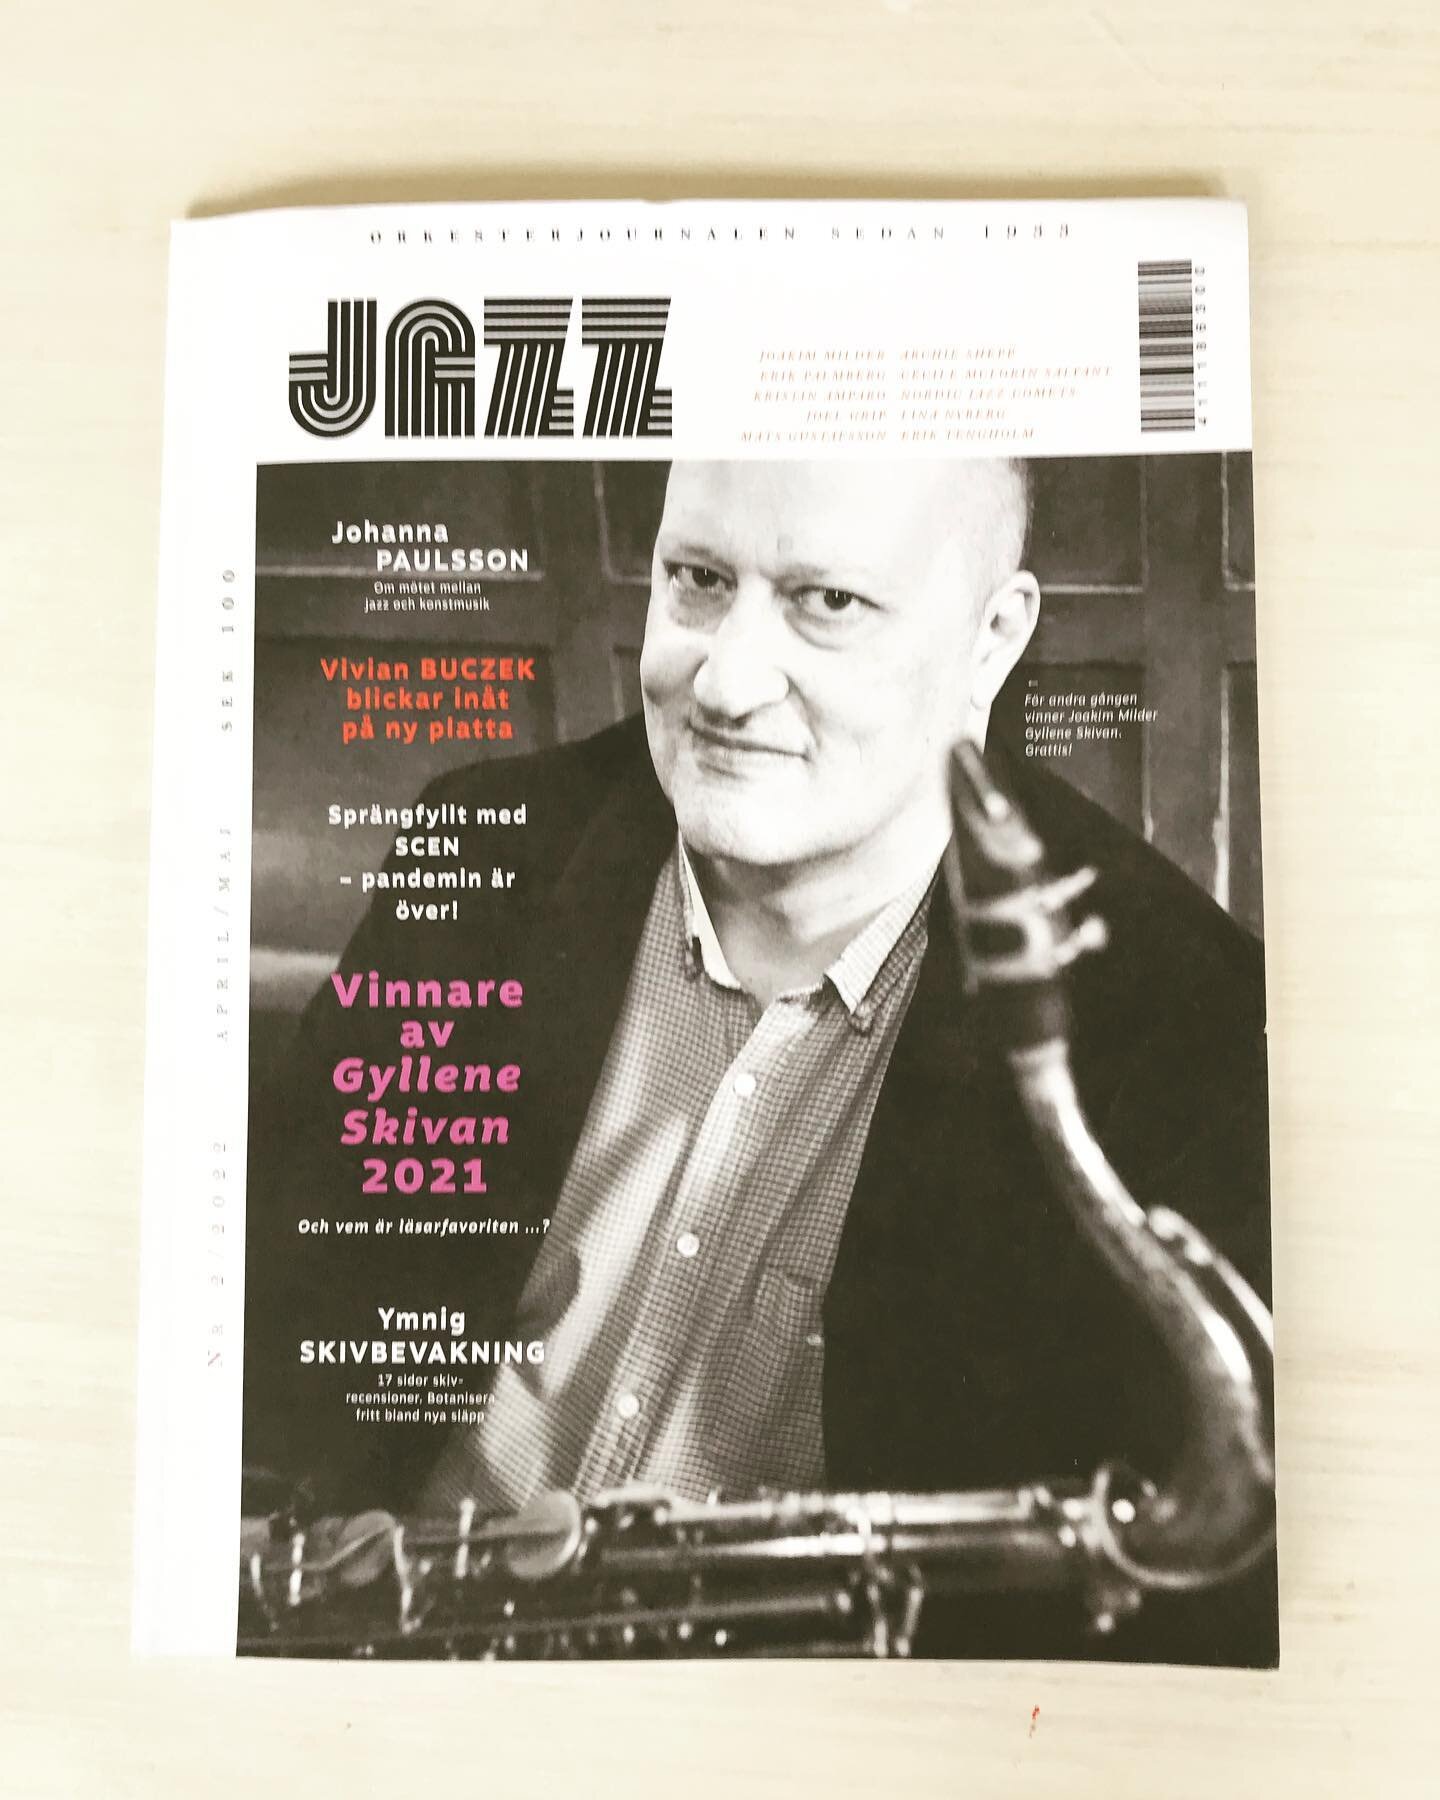 Great review of Songs of wounds and healing in @orkesterjournalen !! Thank you @marieannika !! 🙏🖤🙏
.
.
.
.
.
.
#malinw&auml;ttring #songsofwoundsandhealing #orkesterjournalen #jazz #tidningenjazz #review